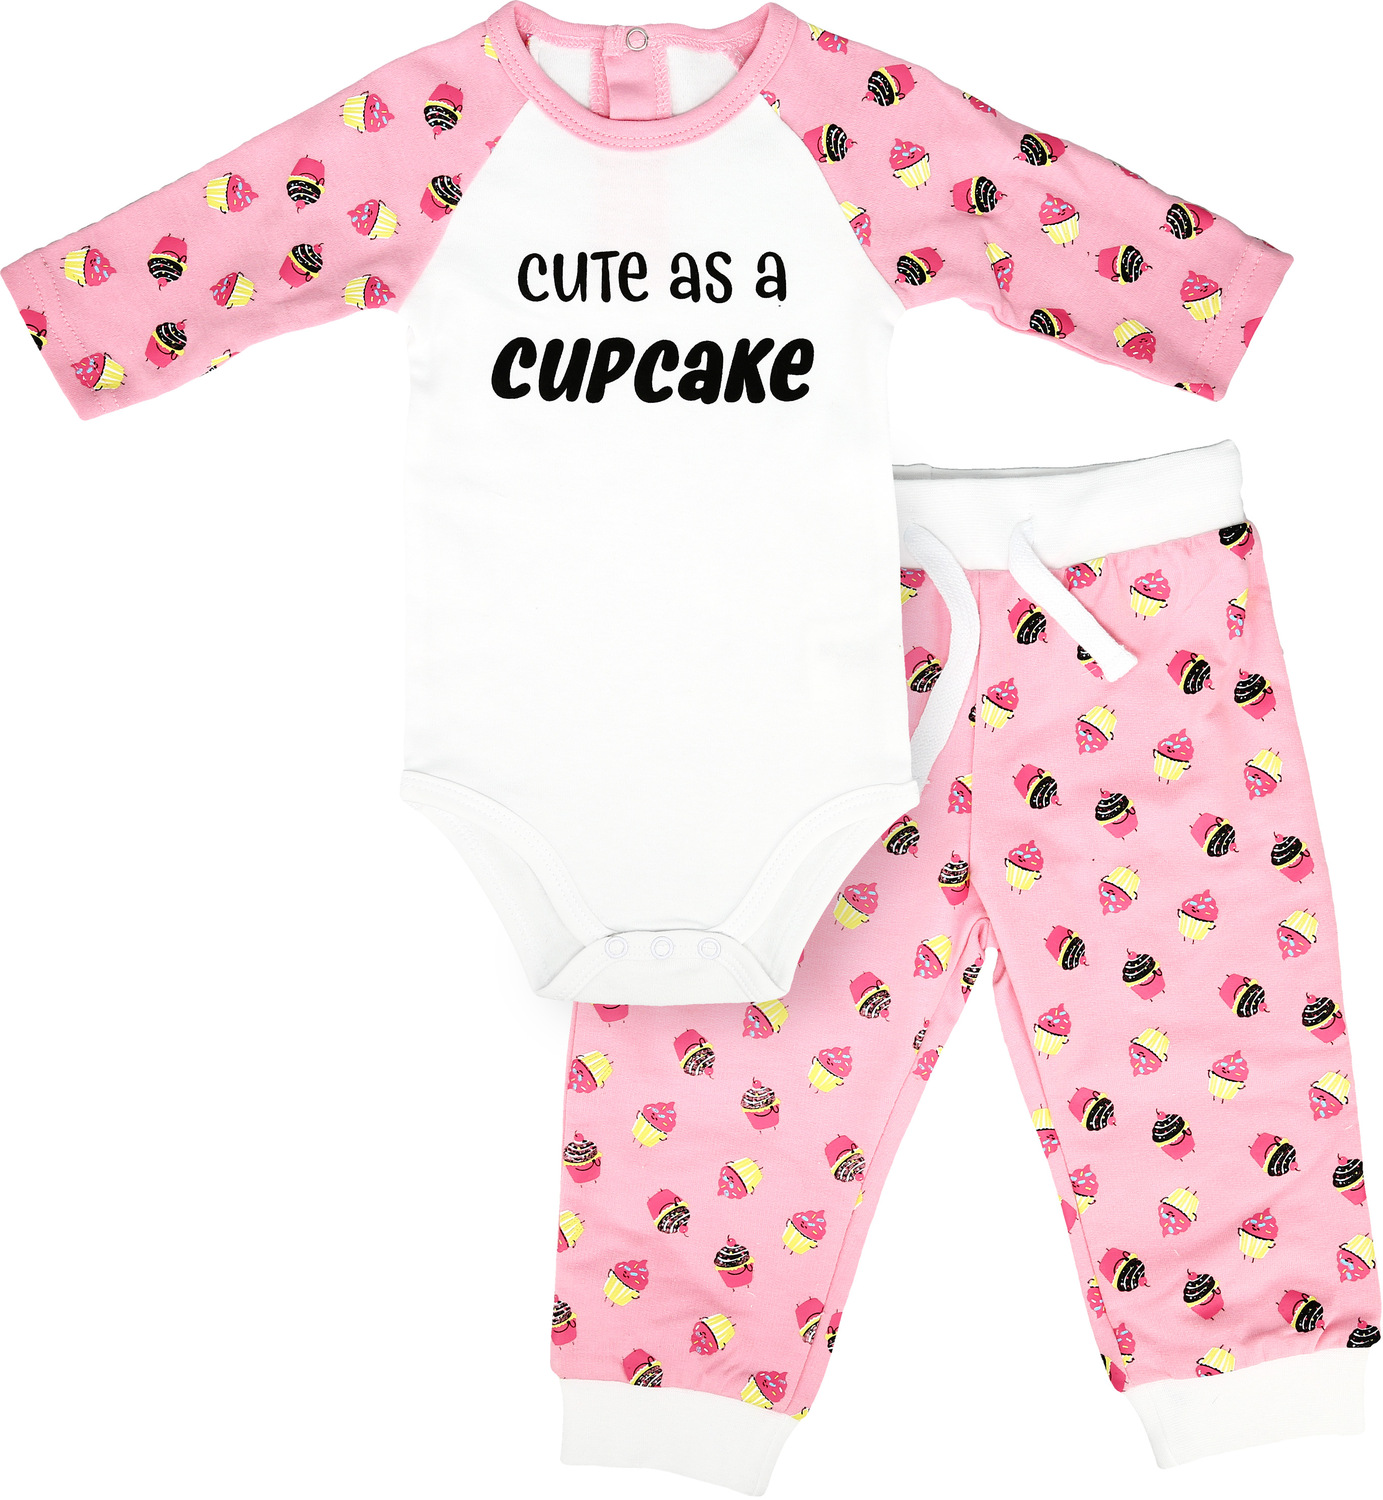 Cute as a Cupcake by Late Night Snacks - Cute as a Cupcake - 6-12 Months
Pink Bodysuit & Pants Set